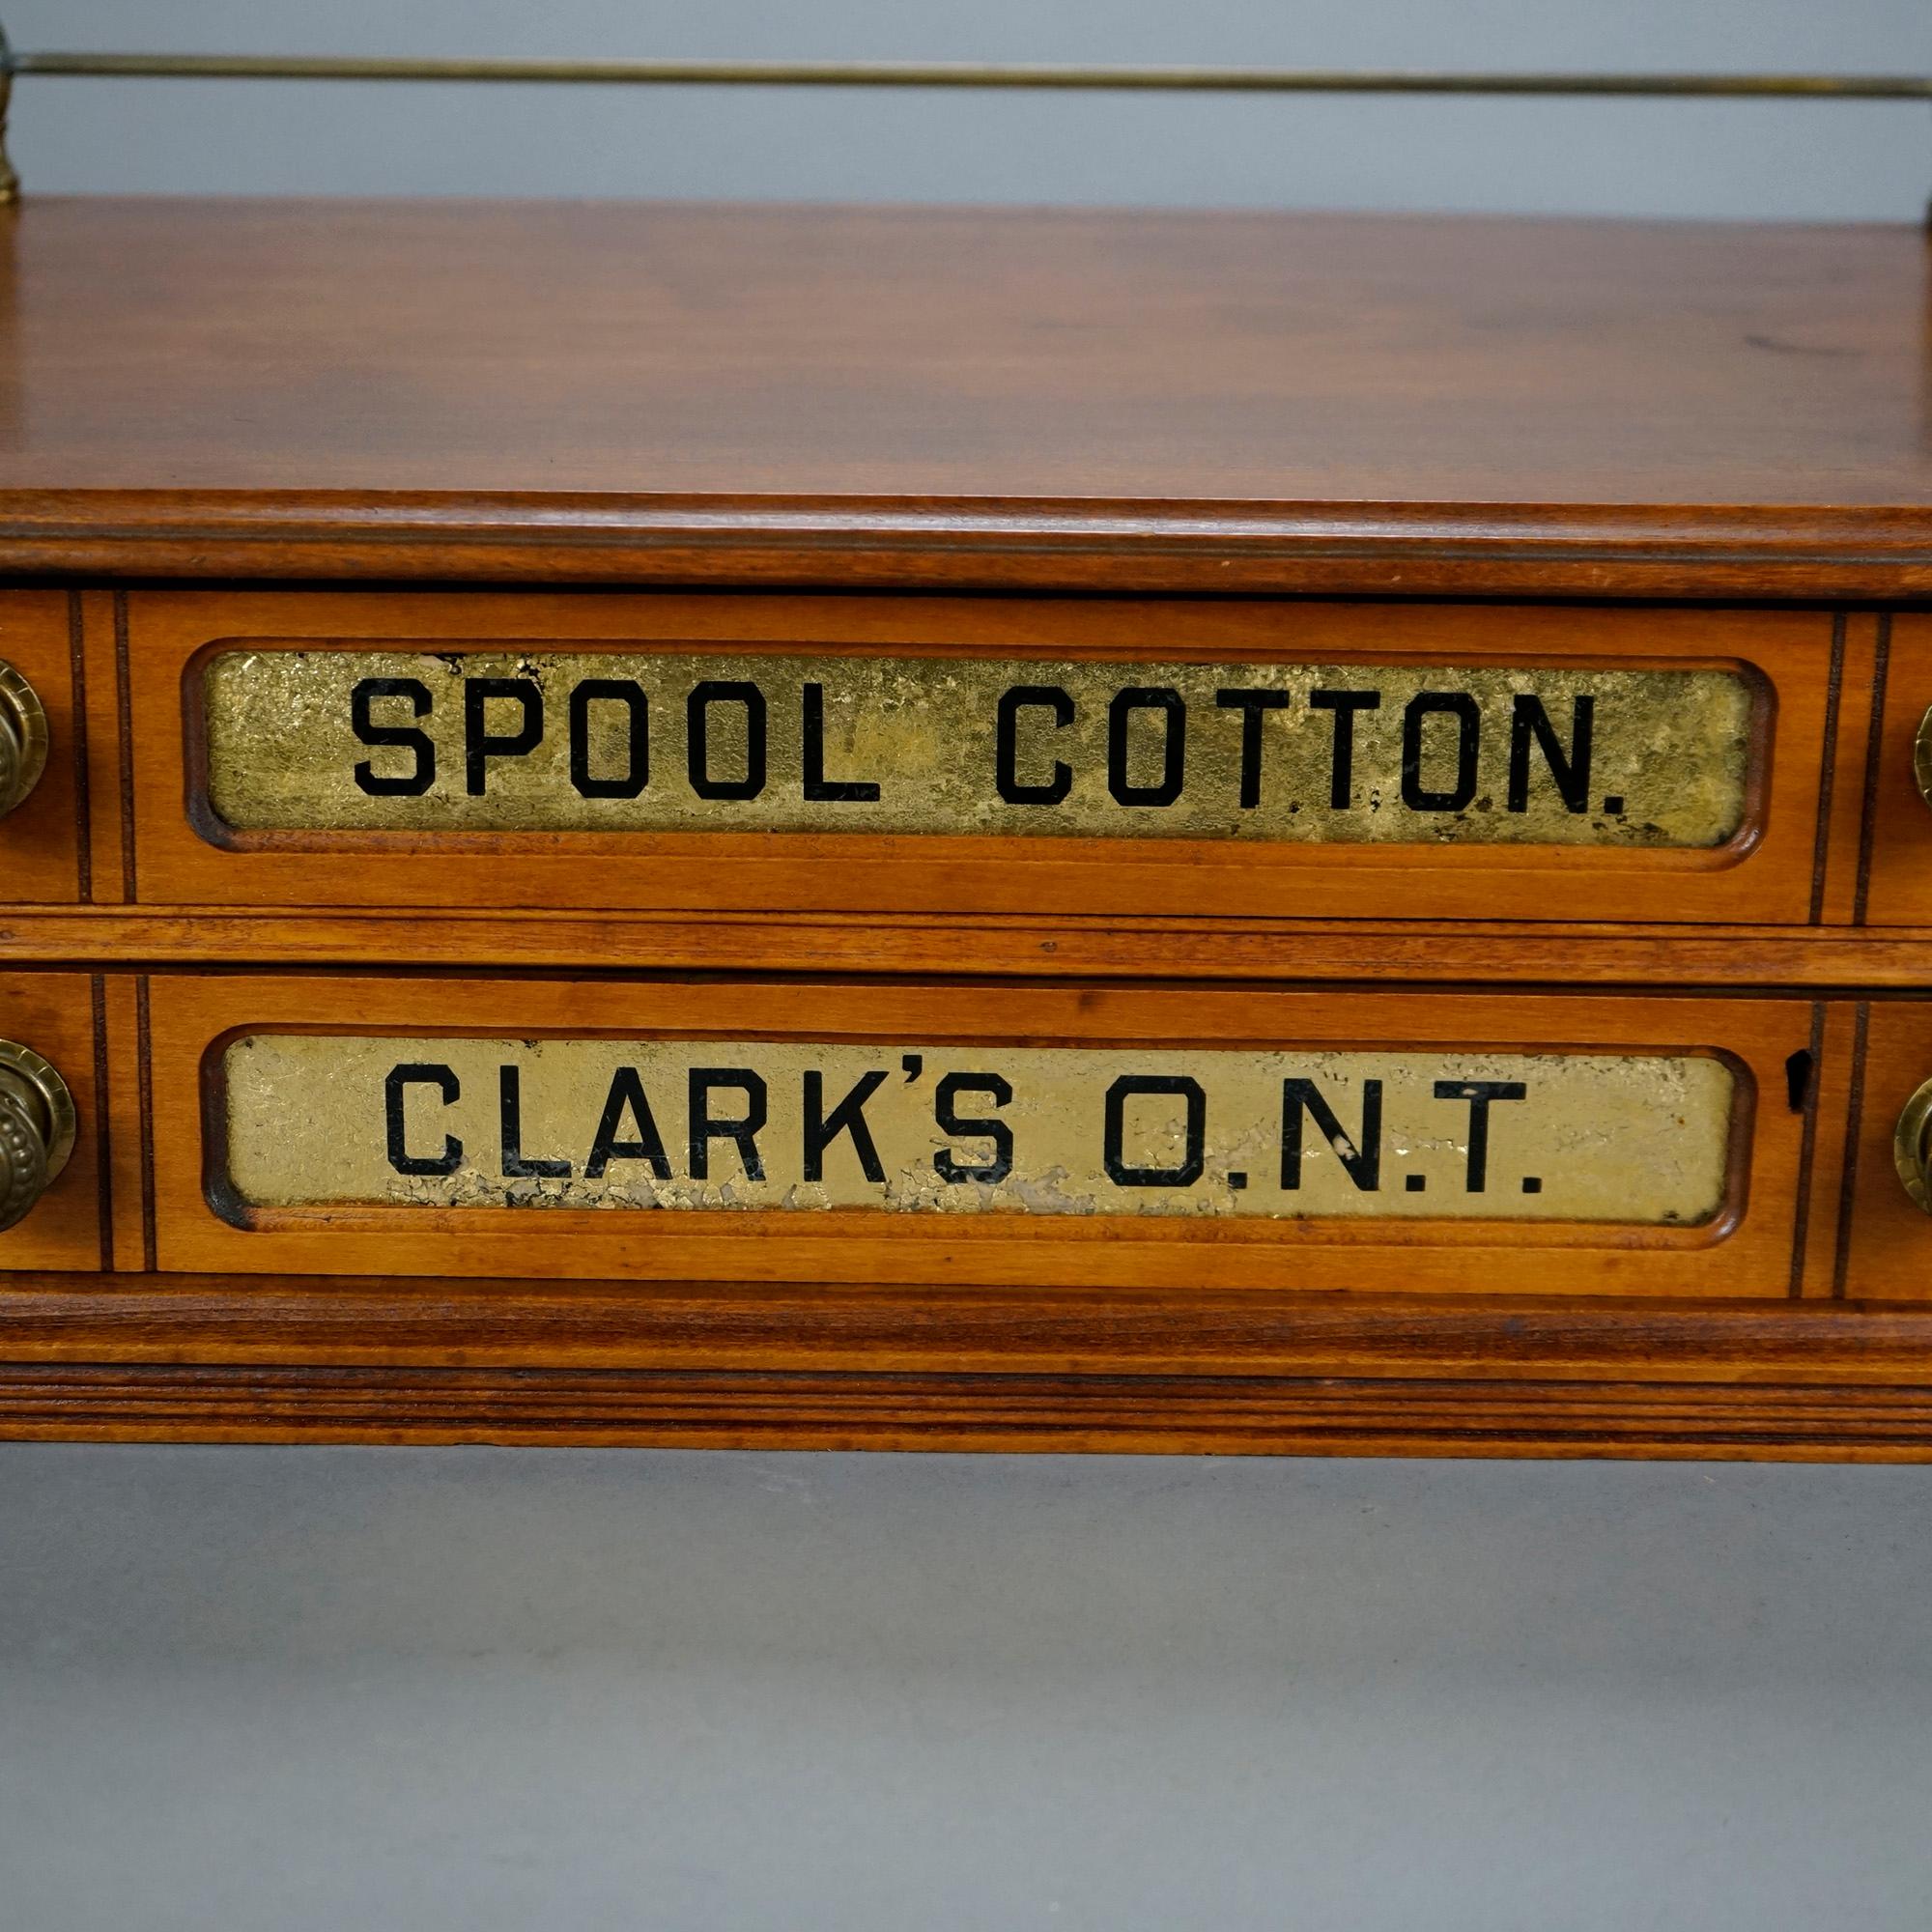 American Antique Clark's Country Store Advertising Two Drawer Spool Thread Cabinet c1890